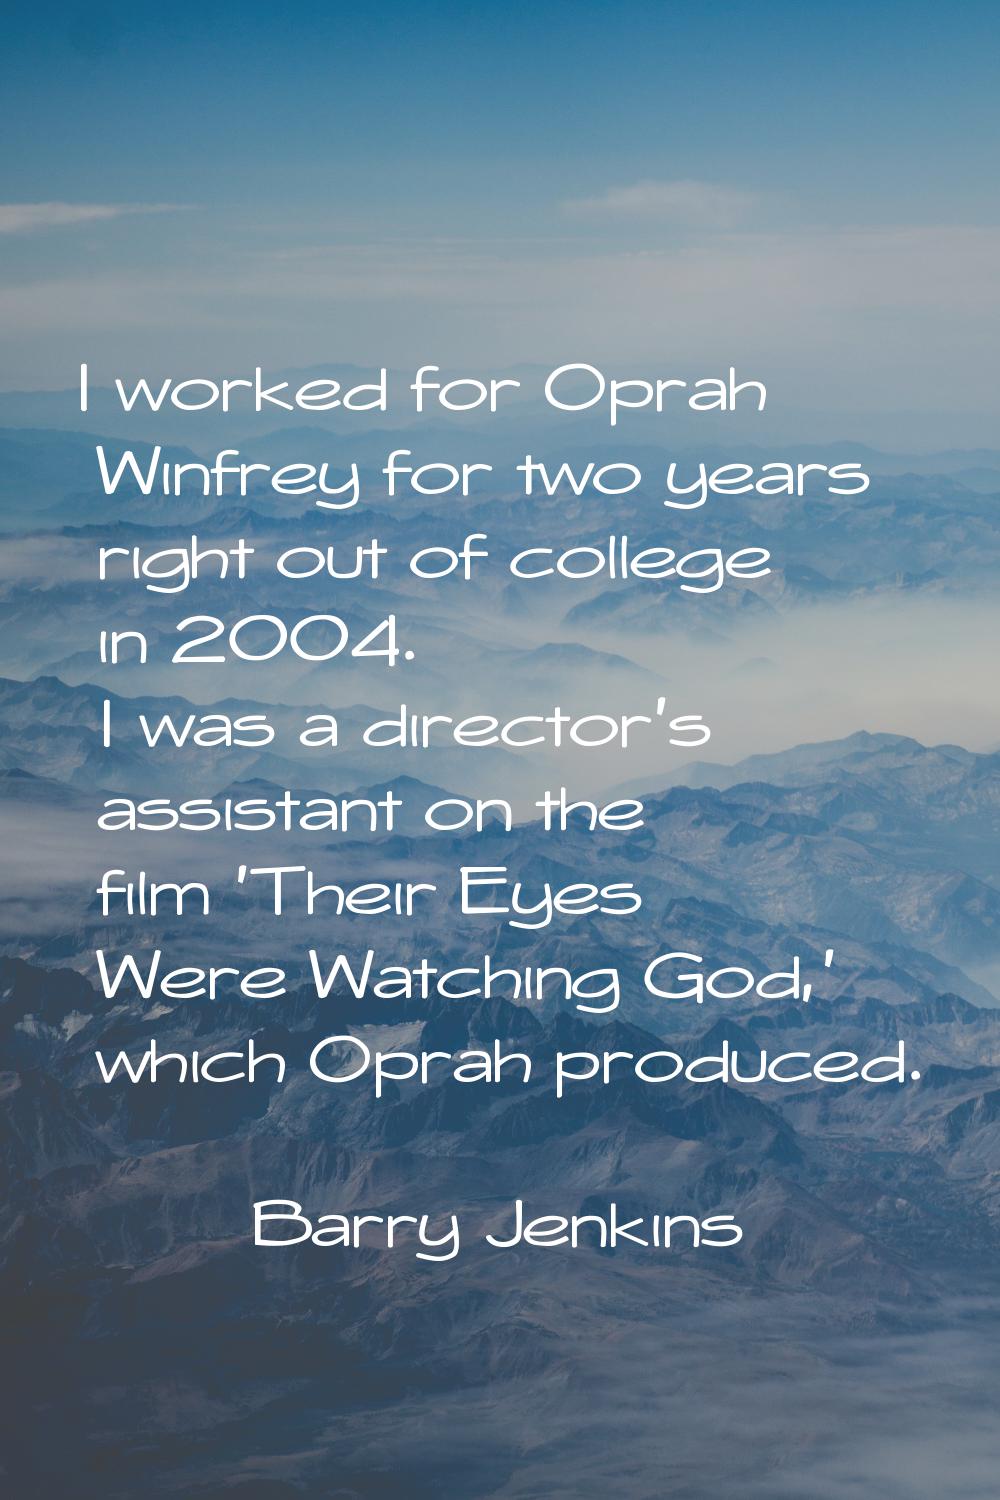 I worked for Oprah Winfrey for two years right out of college in 2004. I was a director's assistant